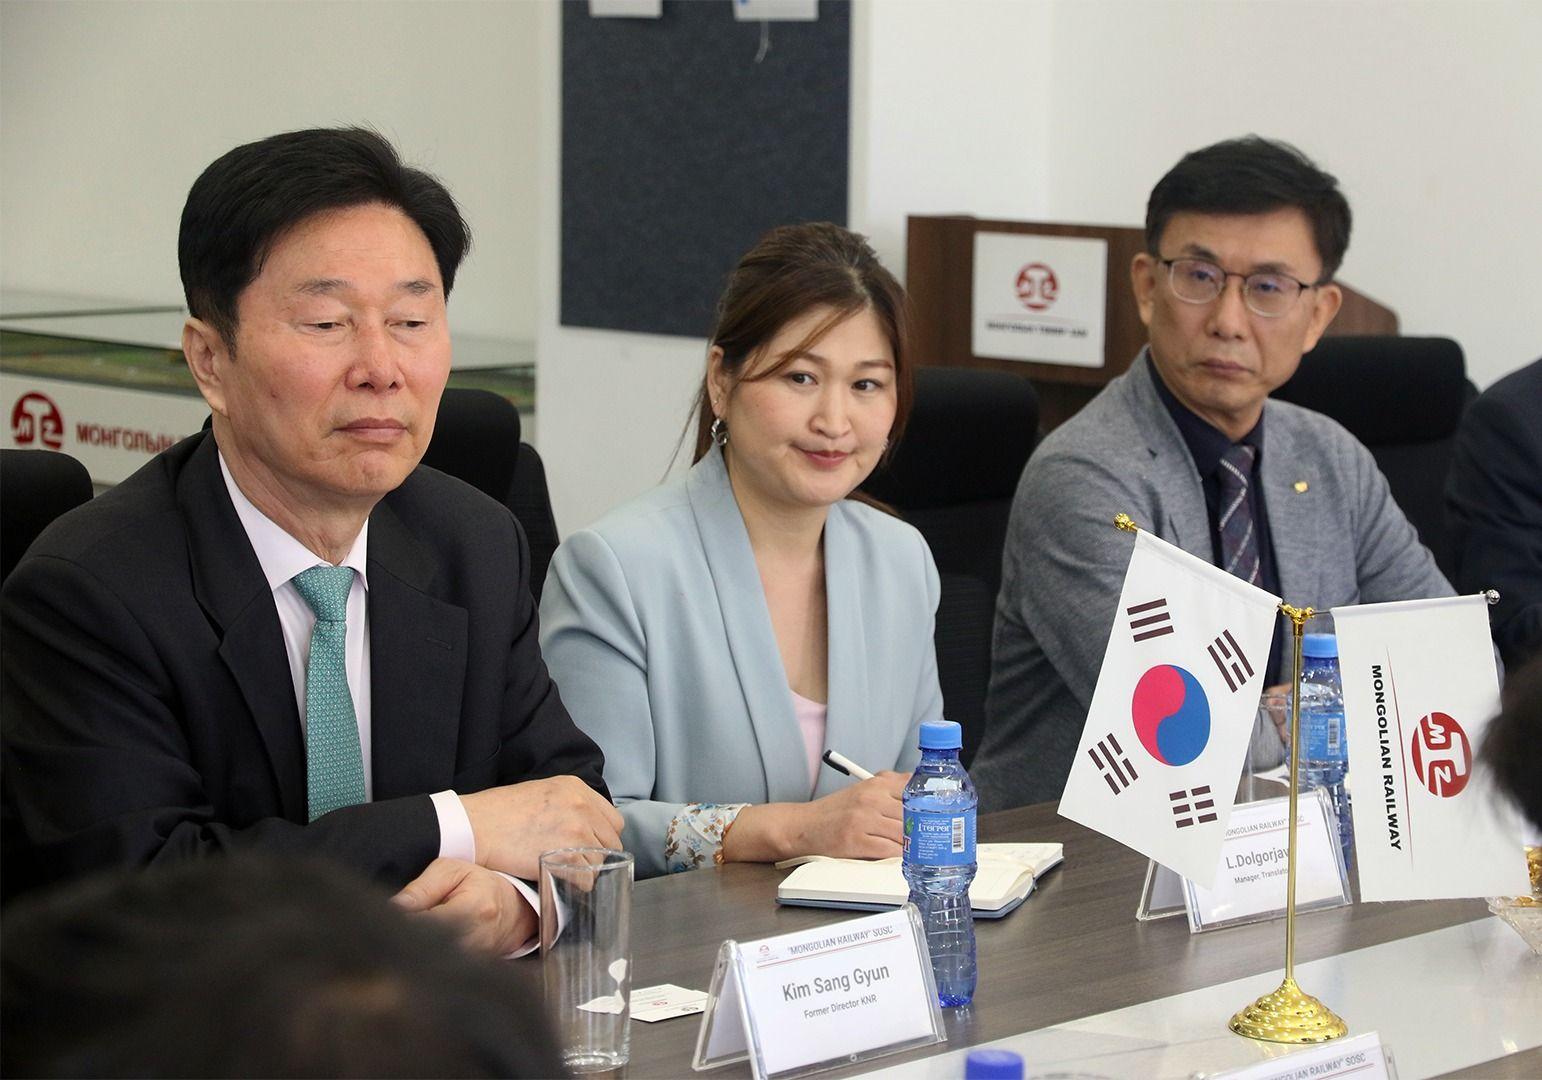 "Mongolian Railway" SOSC executives met with representatives from the state-owned Korean National Railway